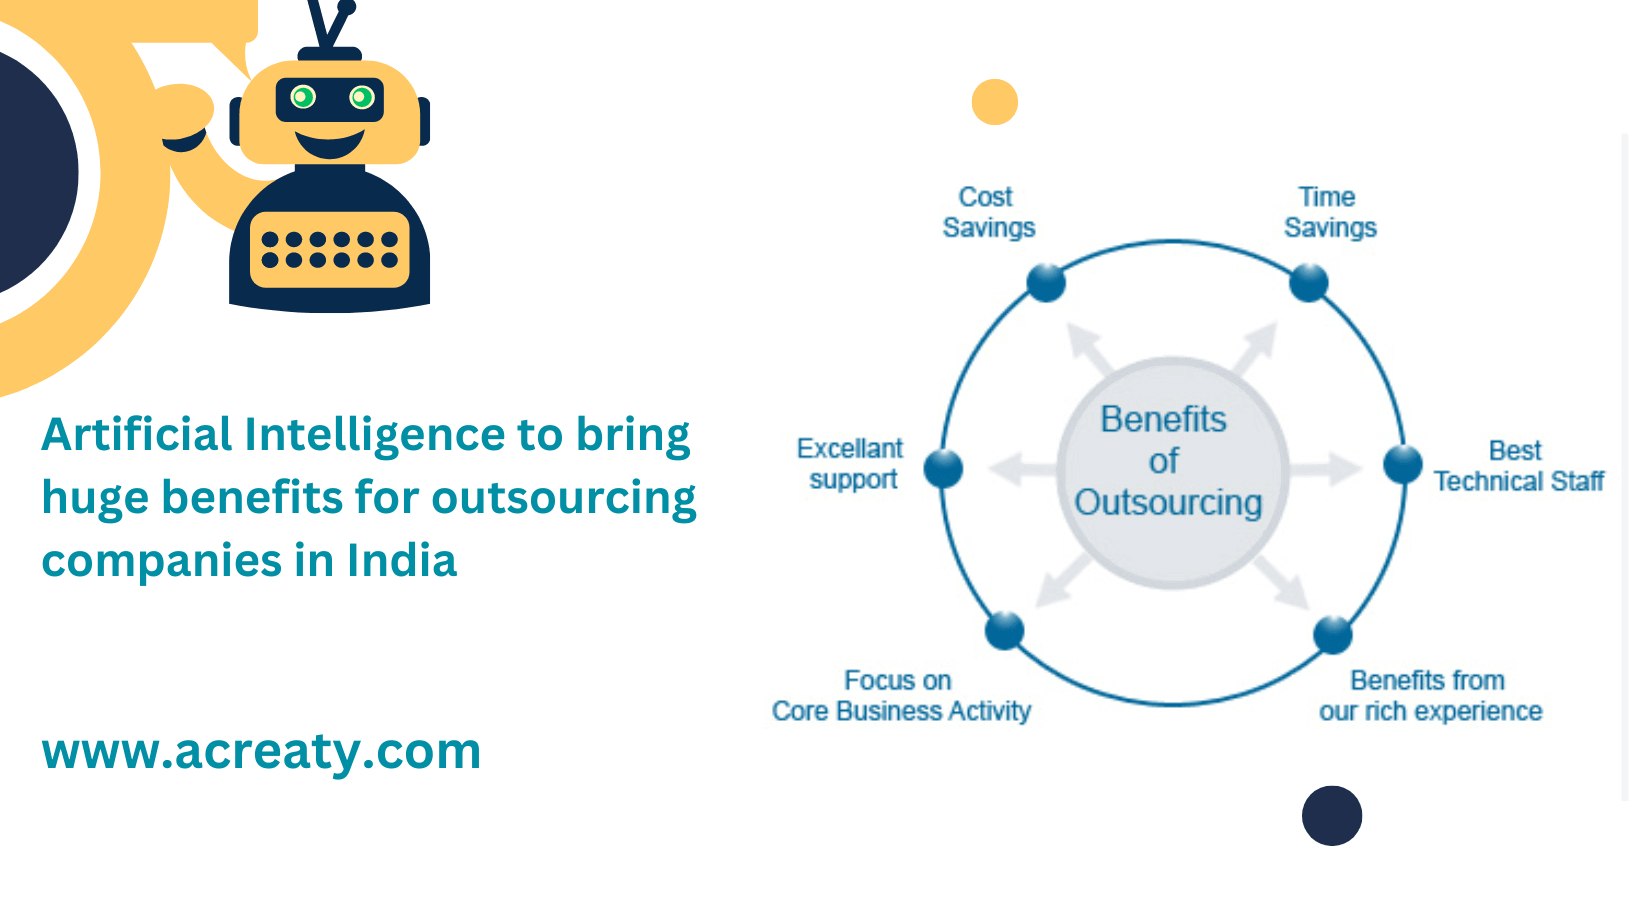 Artificial Intelligence to bring huge benefits for outsourcing companies in India